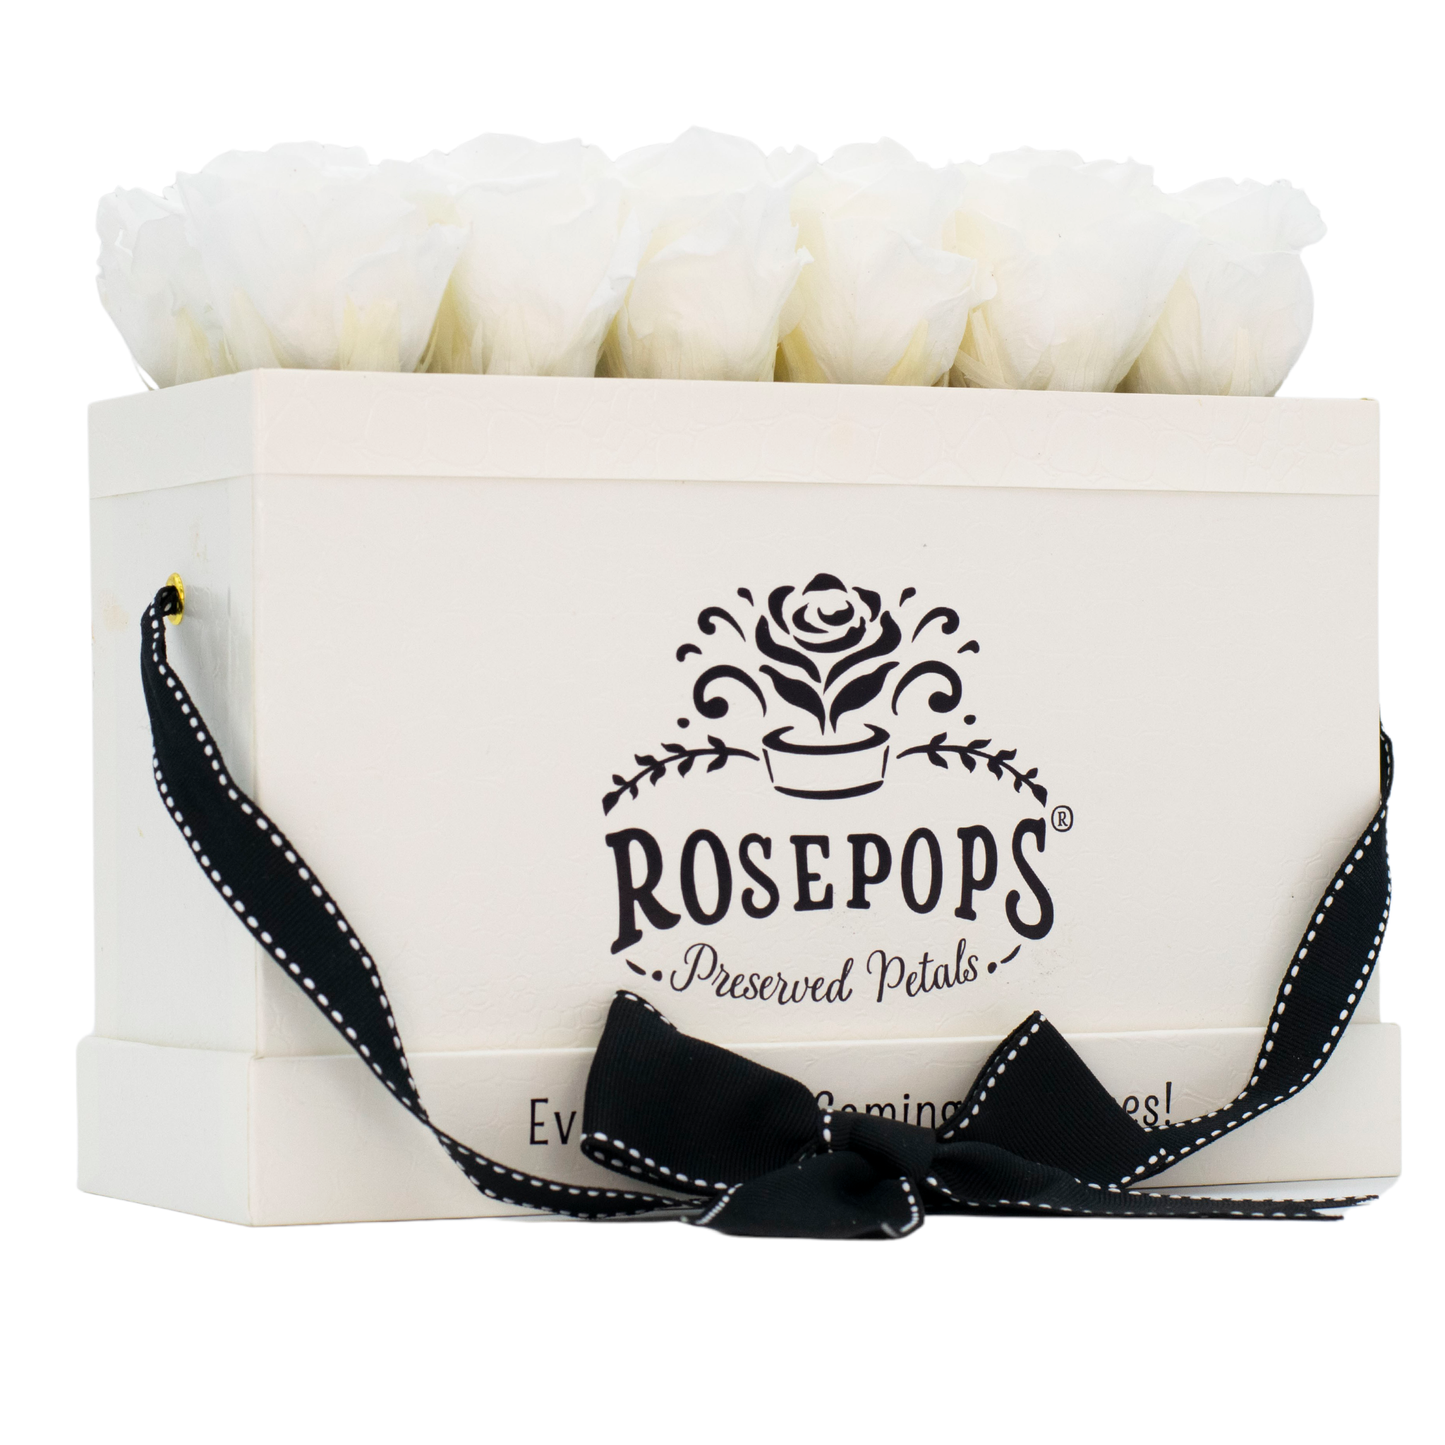 The White Monogrammed Keeper by the Dozen - Marshmallow Fluff Roses